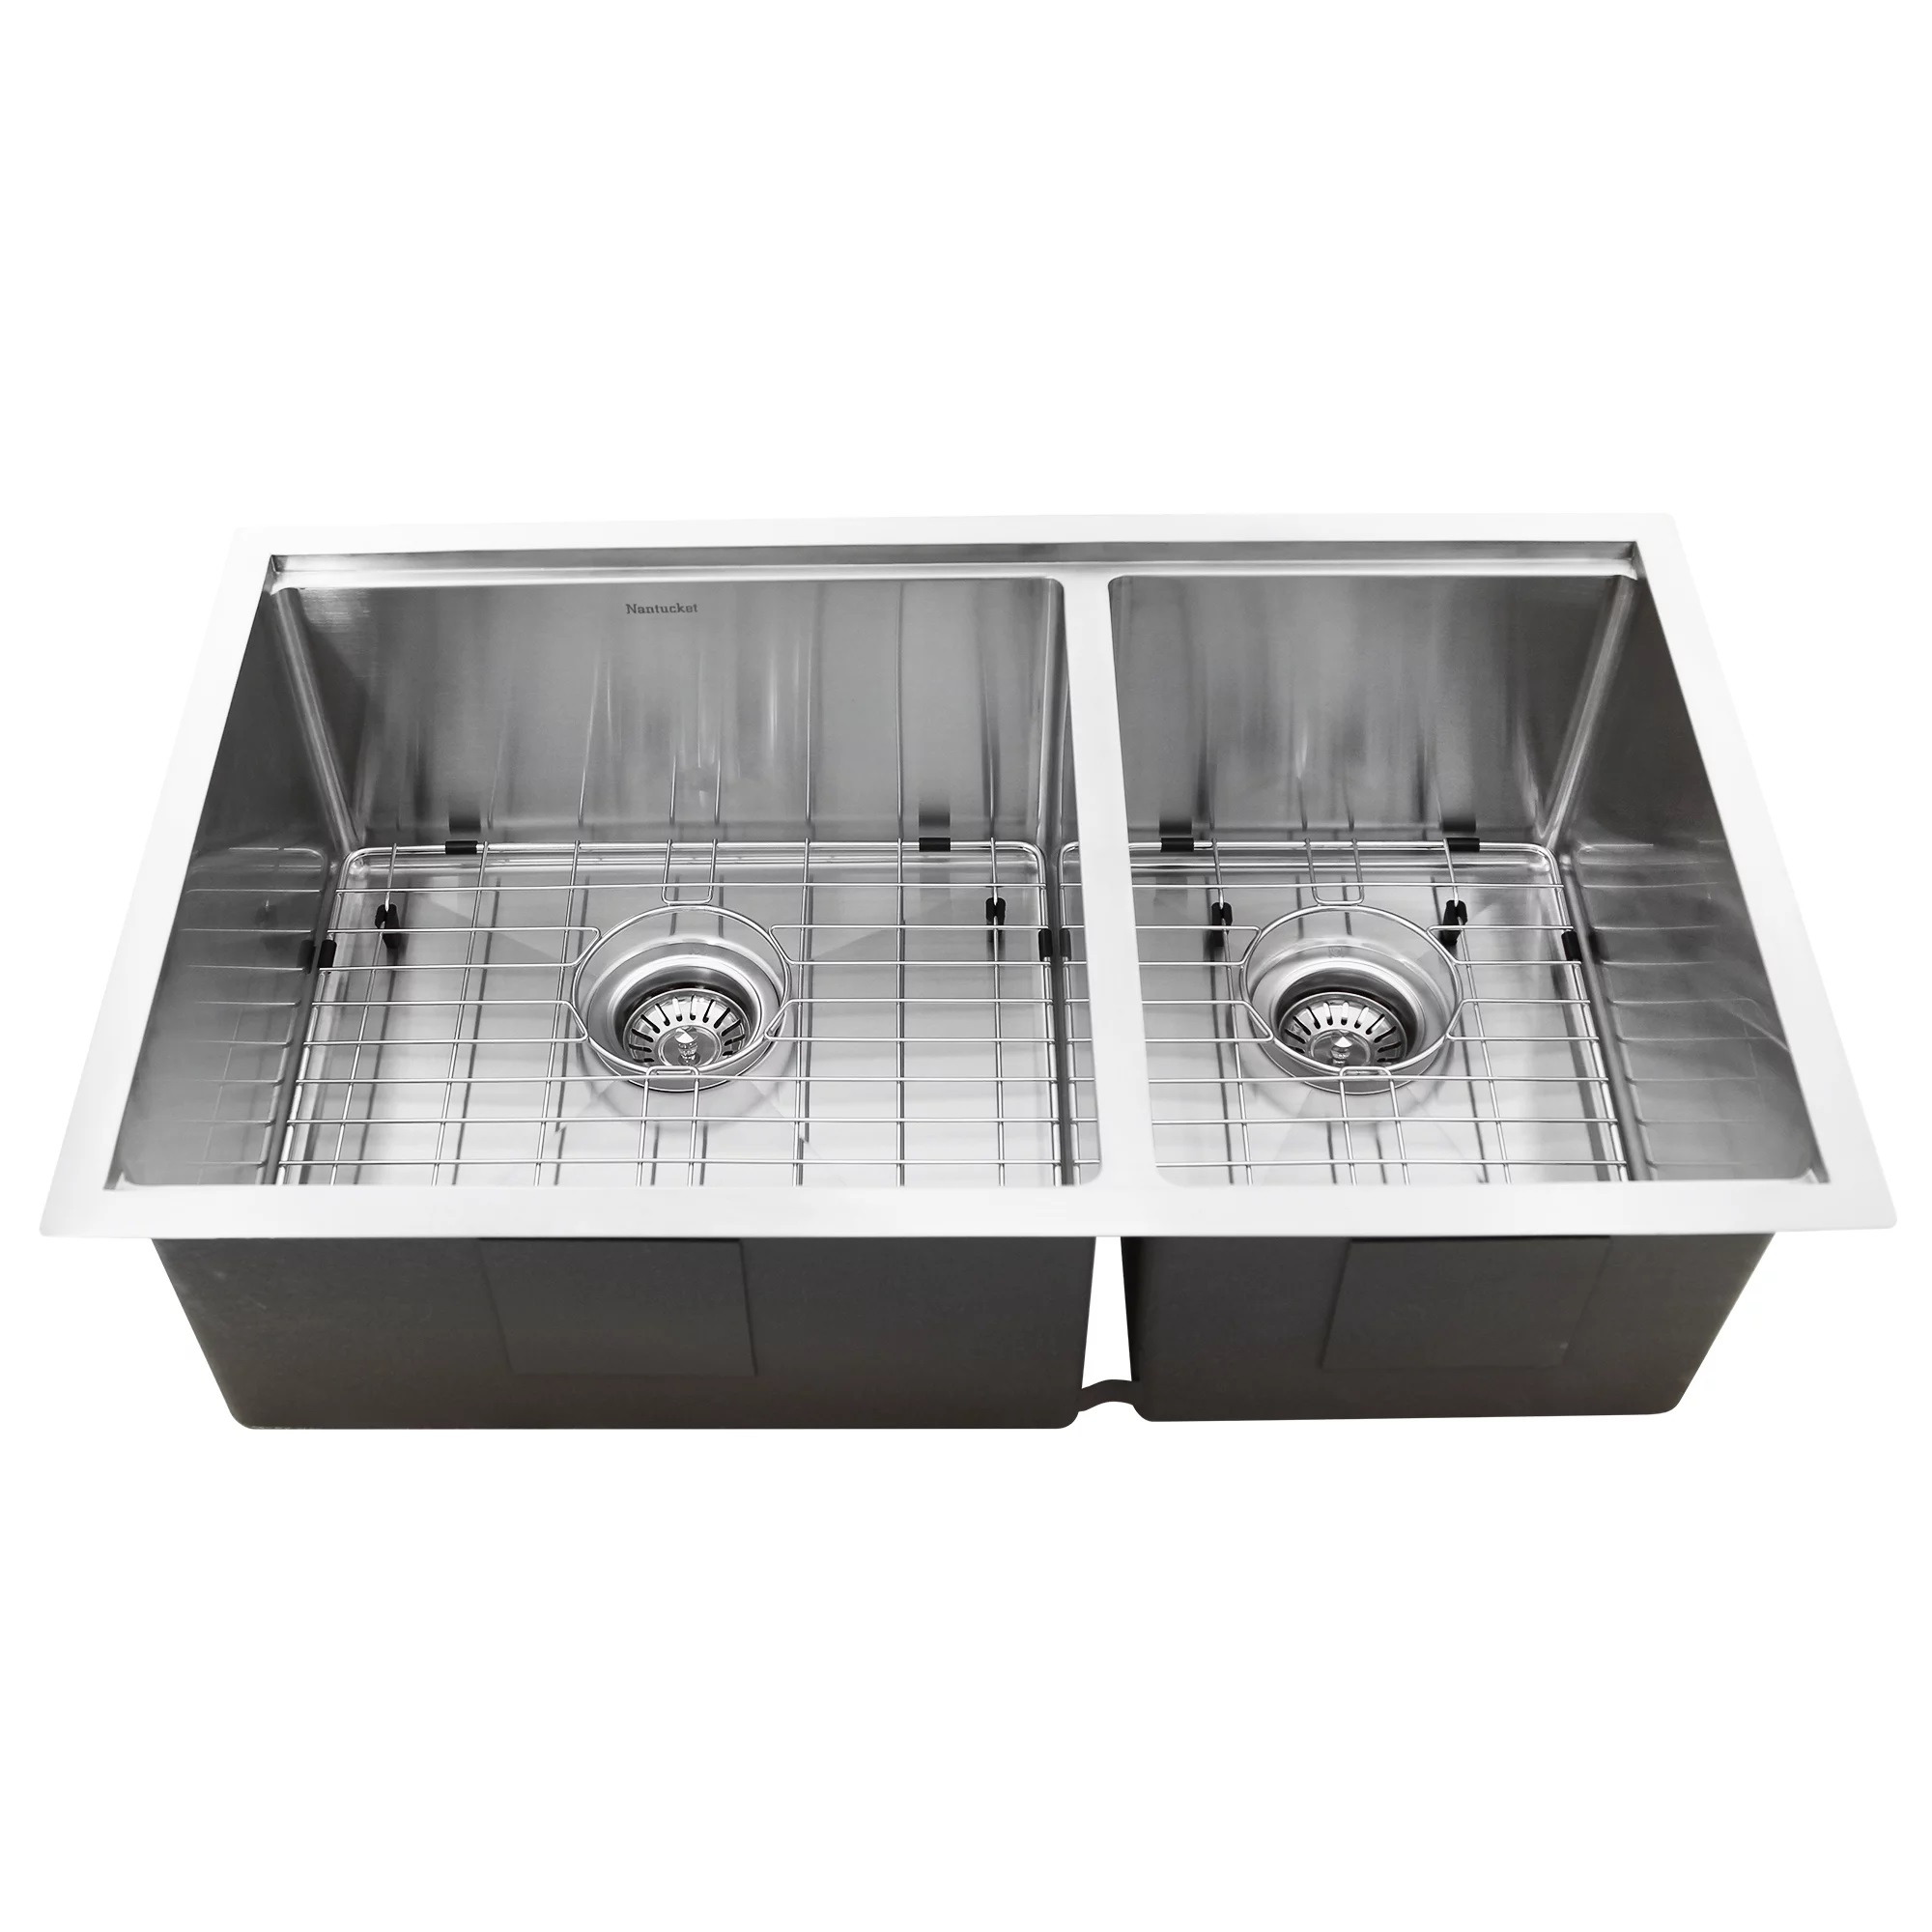 Nantucket Sinks SR-PS-3219-OS-16 SR-PS-3219-OS-16 Offset Double Bowl Prep Station Small Radius Undermount Stainless Sink with Accessories